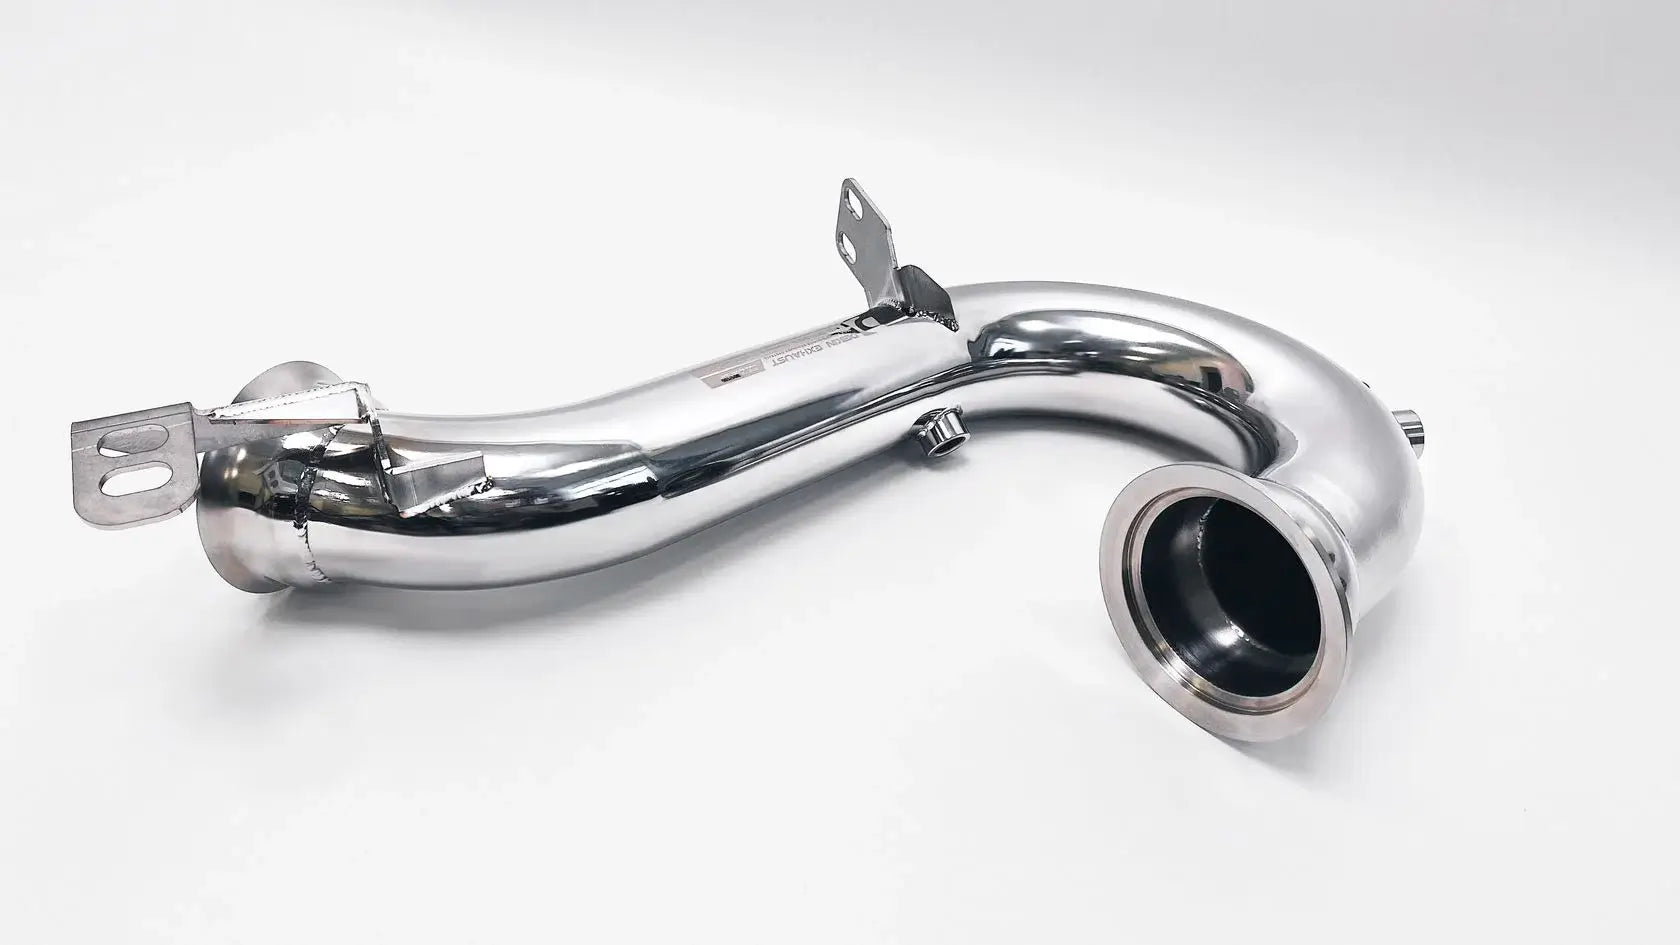 DEIKIN 10-MB.CLS53.C257-DP Downpipe for Mercedes CLS53 (C257) without HeatShield Photo-0 